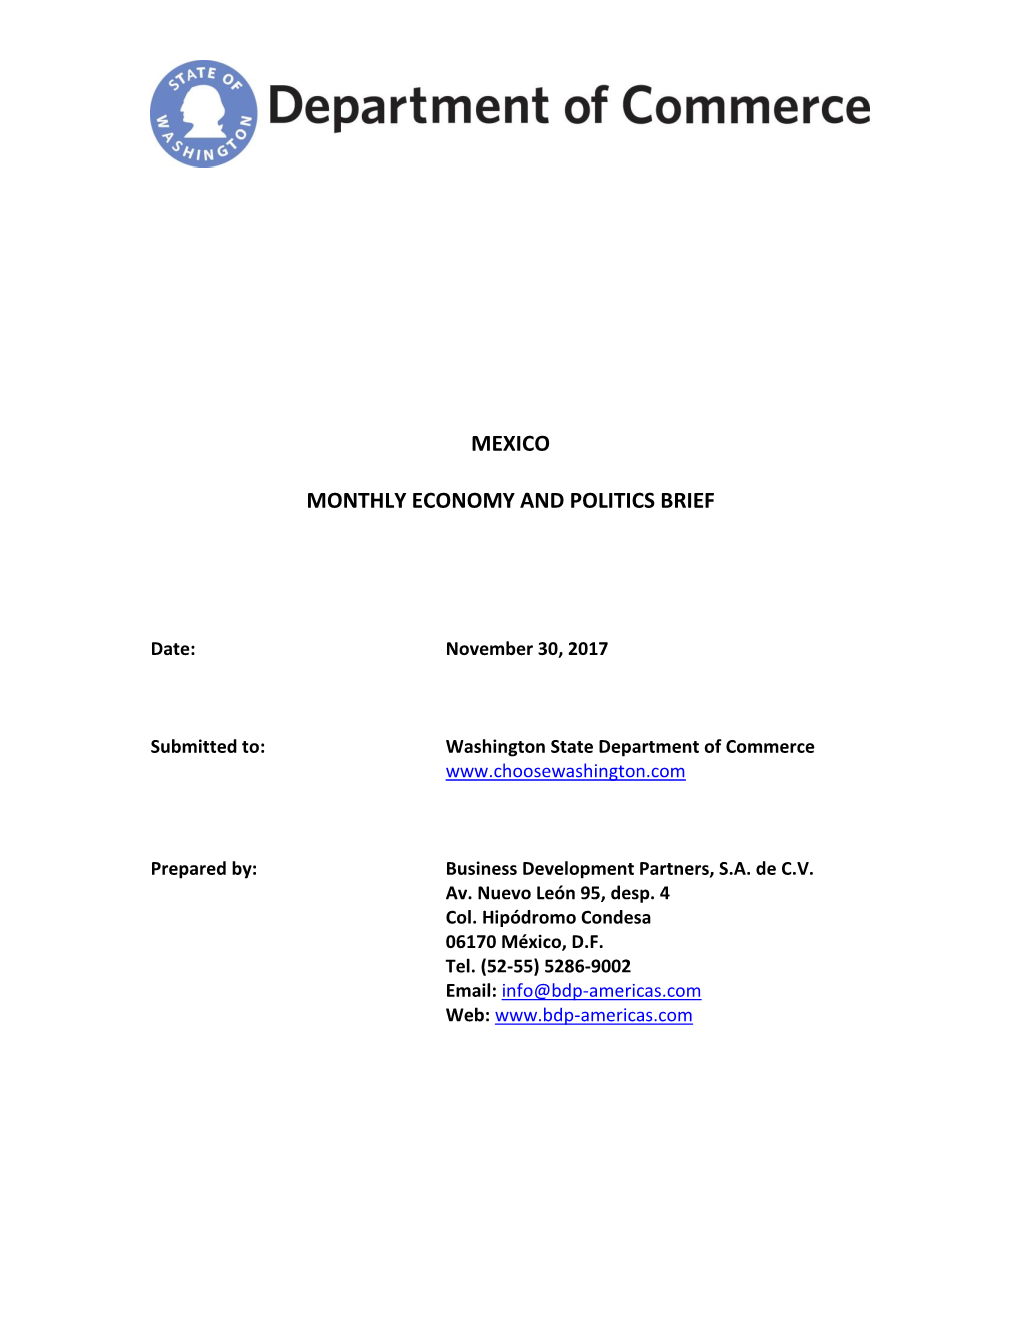 Report on General Trade Inquiry